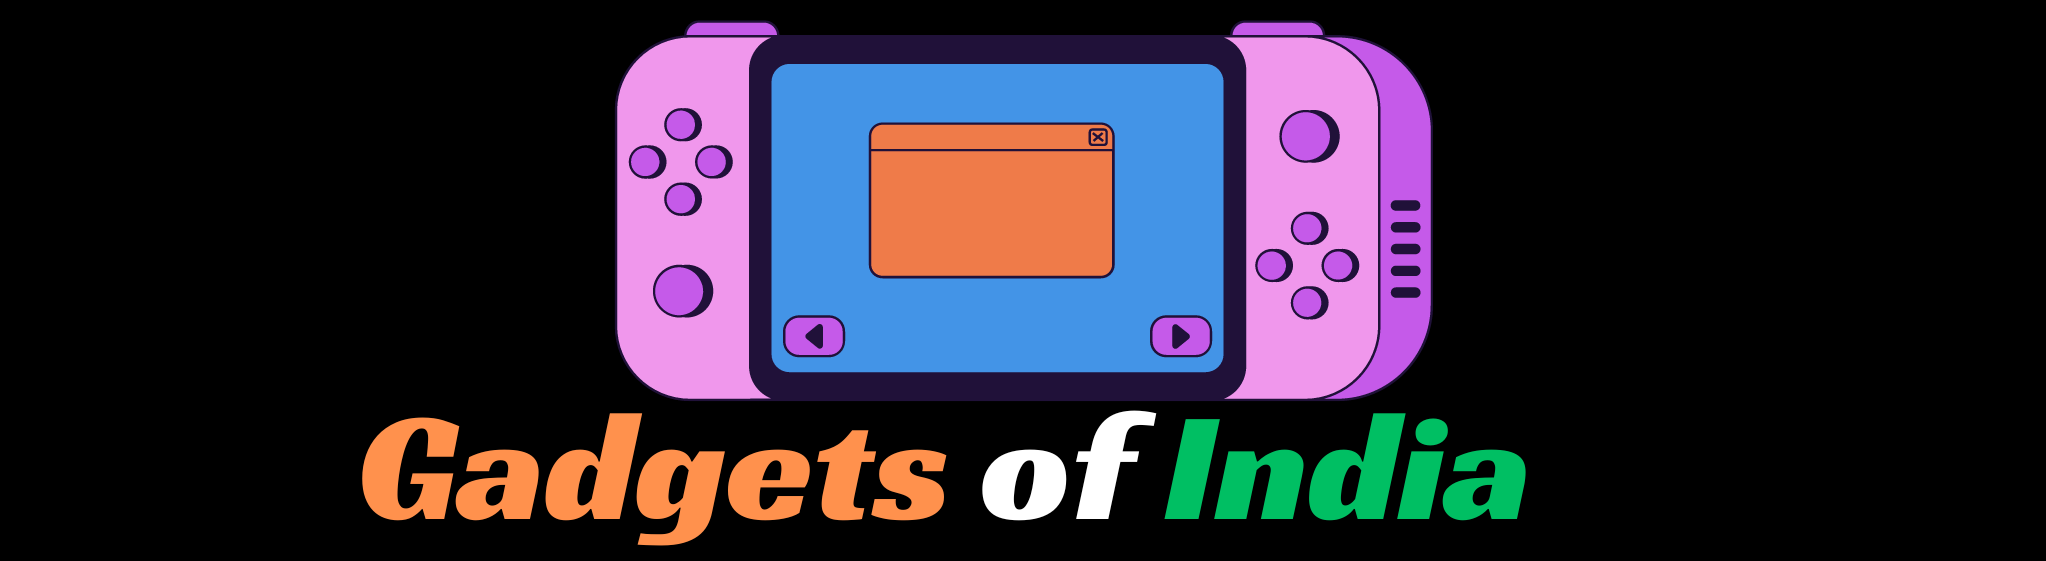 gadgets of india